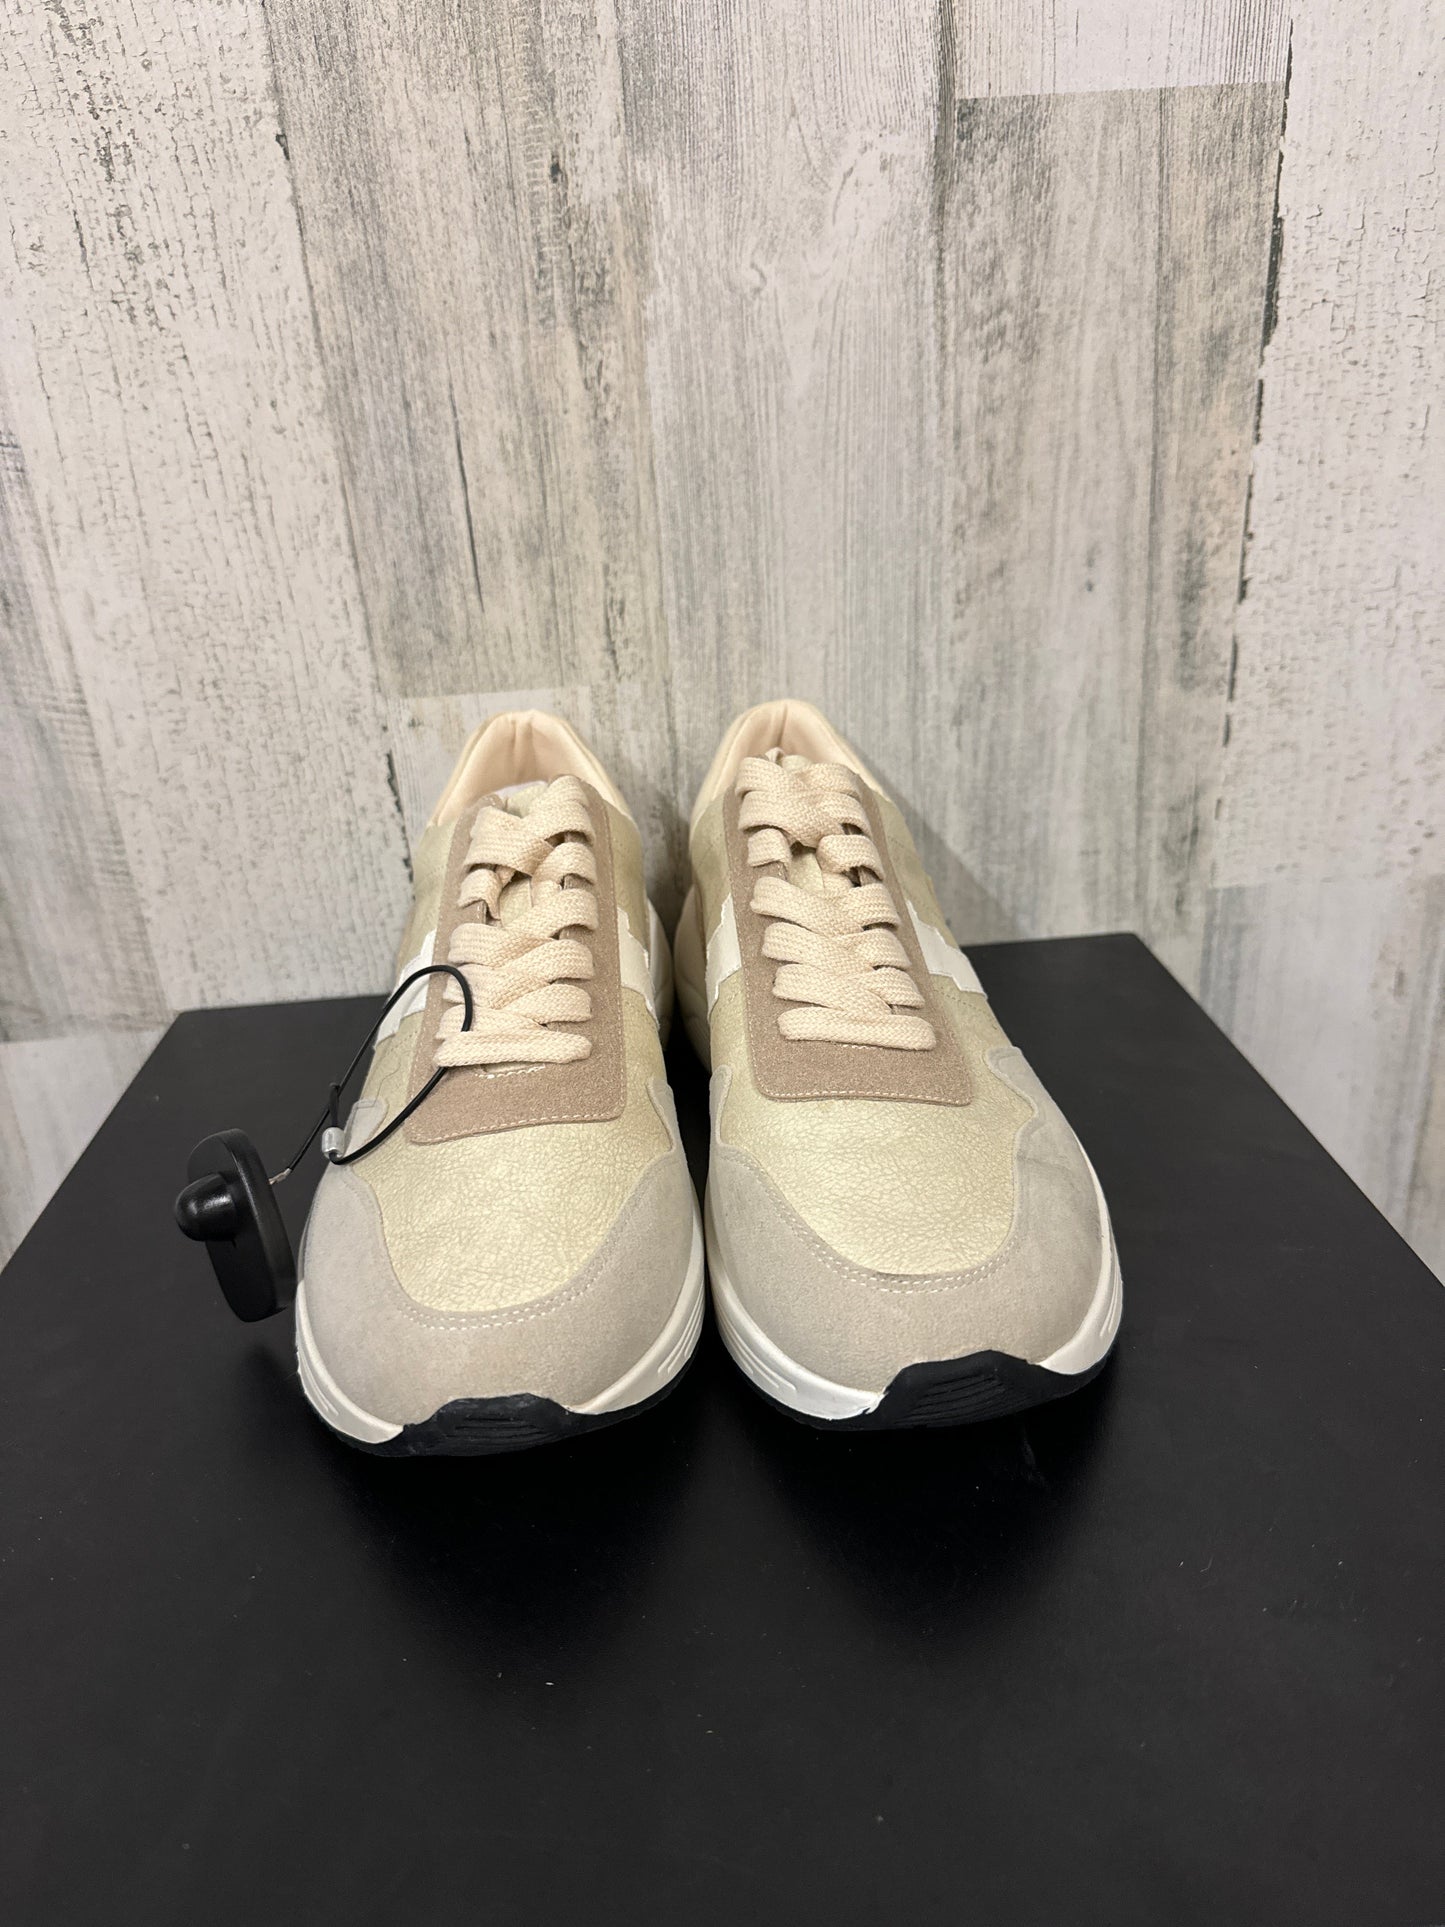 Tan Shoes Athletic Clothes Mentor, Size 10